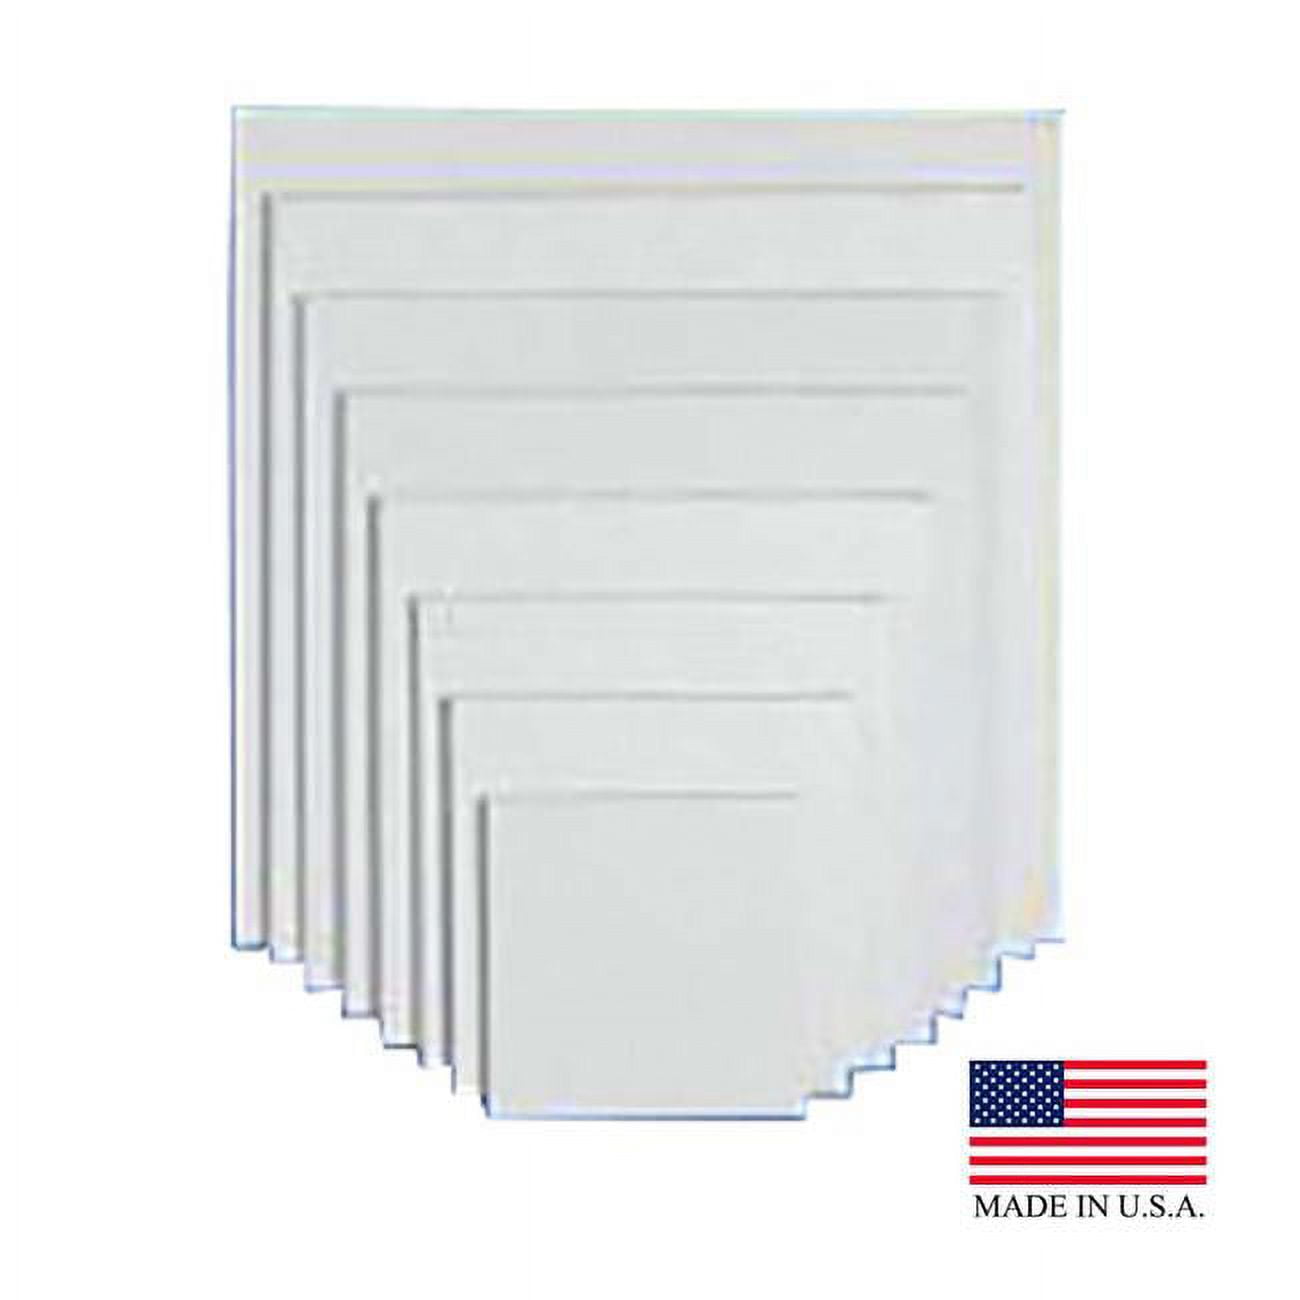 18x14 Ctd Pe 18 X 14 In. White Corrugated Wall Cake Pad - Pack Of 50